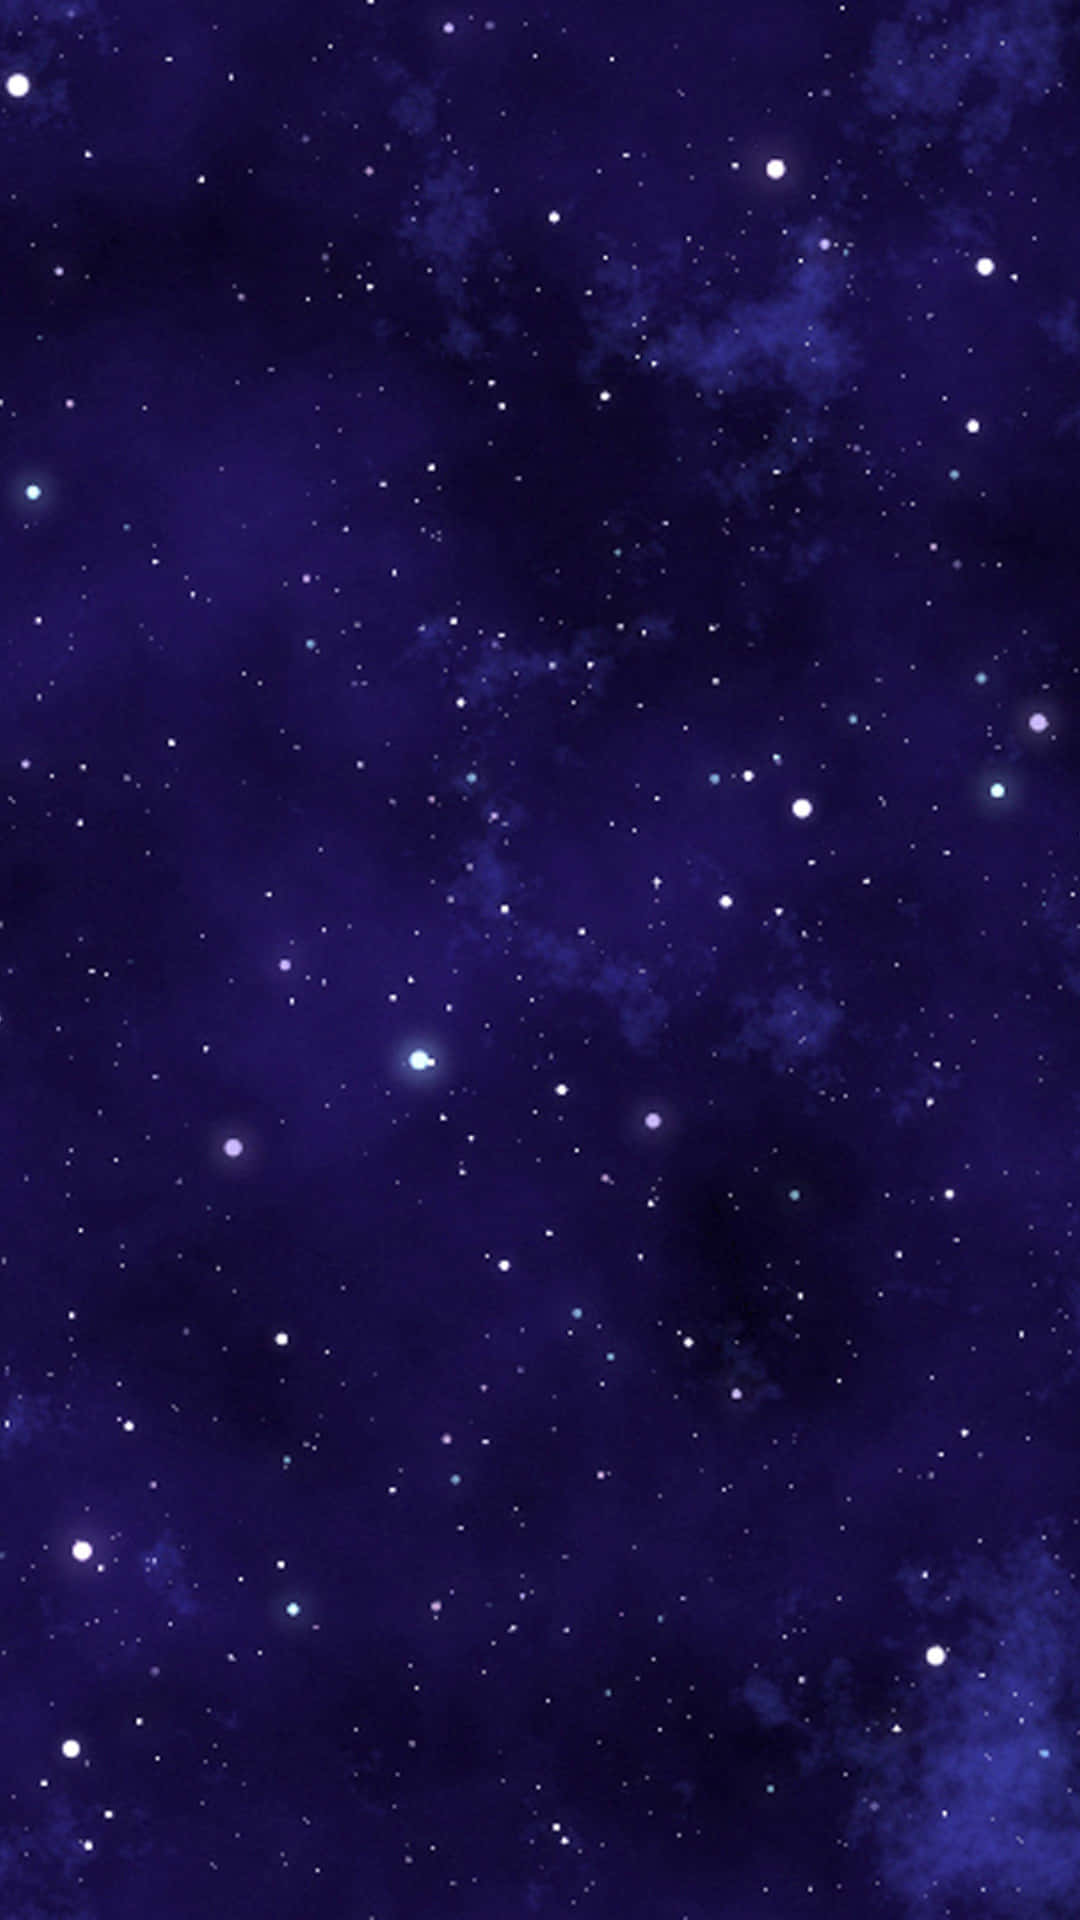 Caption: Enigmatic Deep Space Nebulae Wallpaper